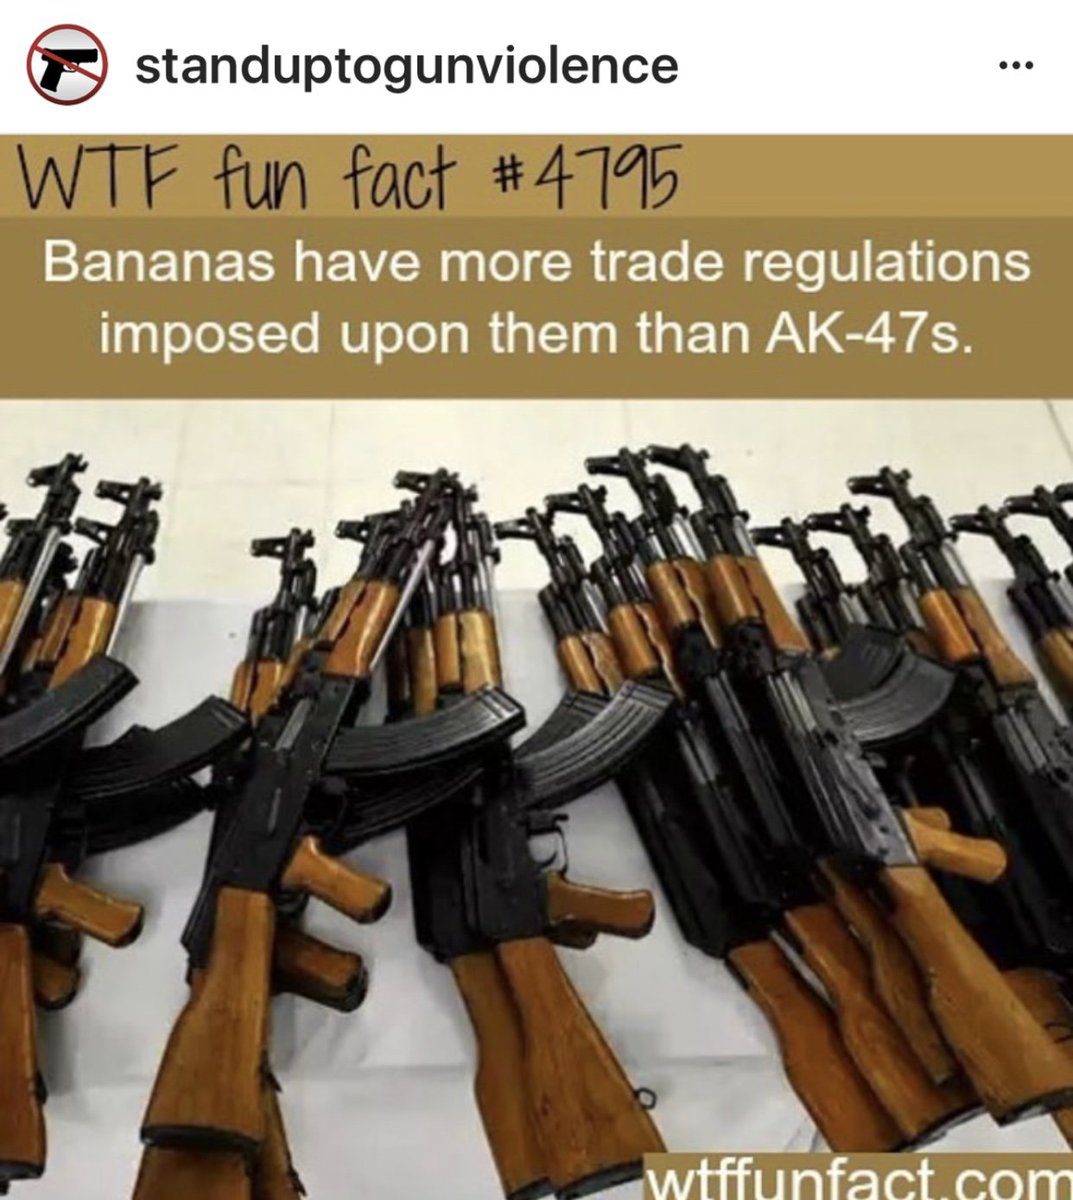 Hhmmmmm..........trump’s in the
White House & Bananas have more restrictions than a weapon
That kills children https://t.co/u8UzovW1zb